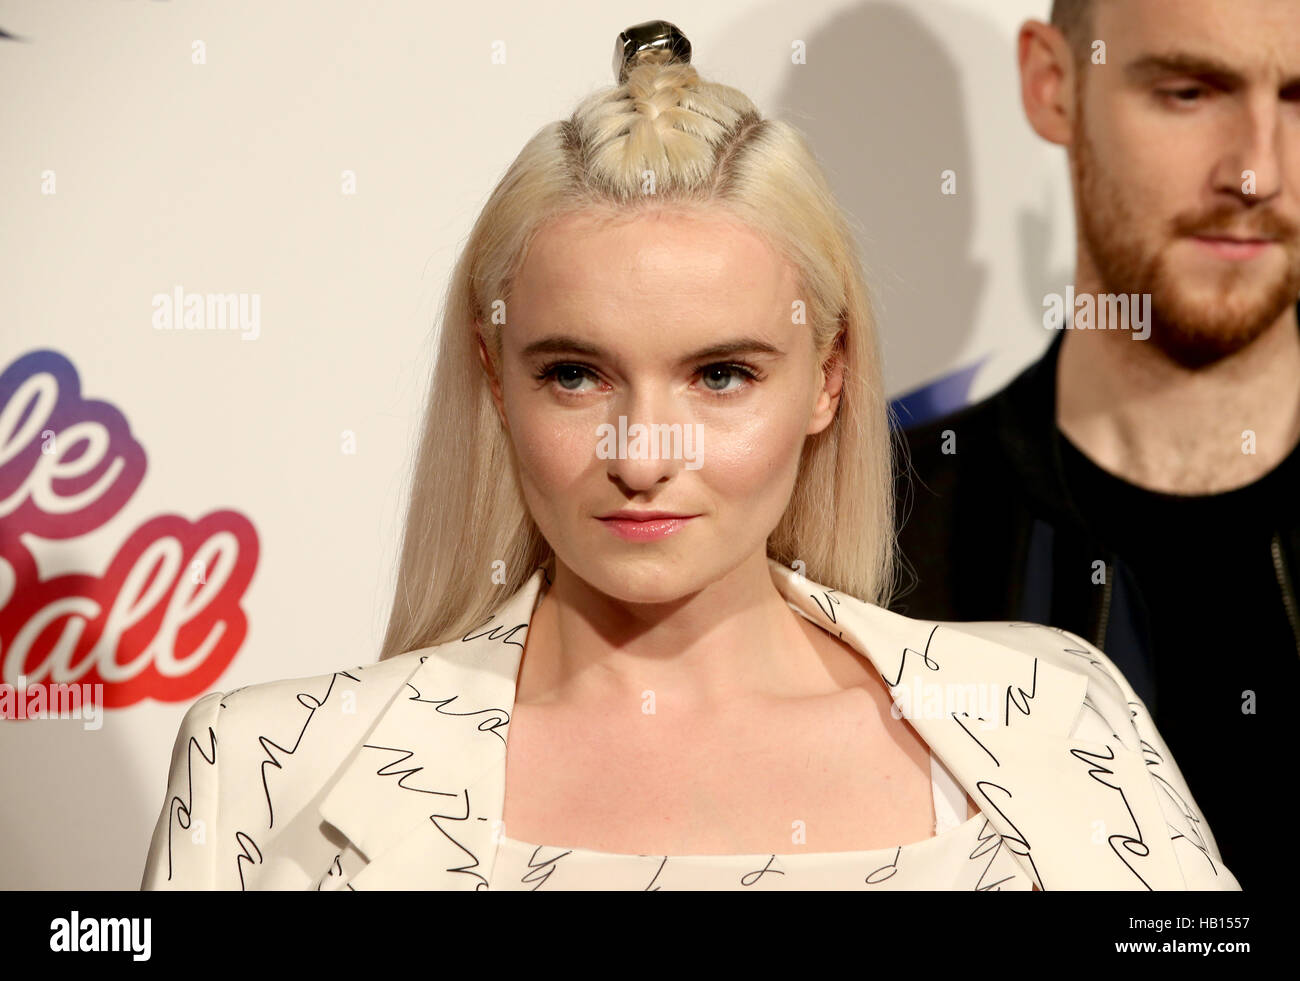 Grace Chatto of Clean Bandit during Capital's Jingle Bell Ball with Coca-Cola at London's O2 arena. PRESS ASSOCIATION Photo. Picture date: Saturday 3rd December 2016. Photo credit should read: Daniel Leal-Olivas/PA Wire Stock Photo